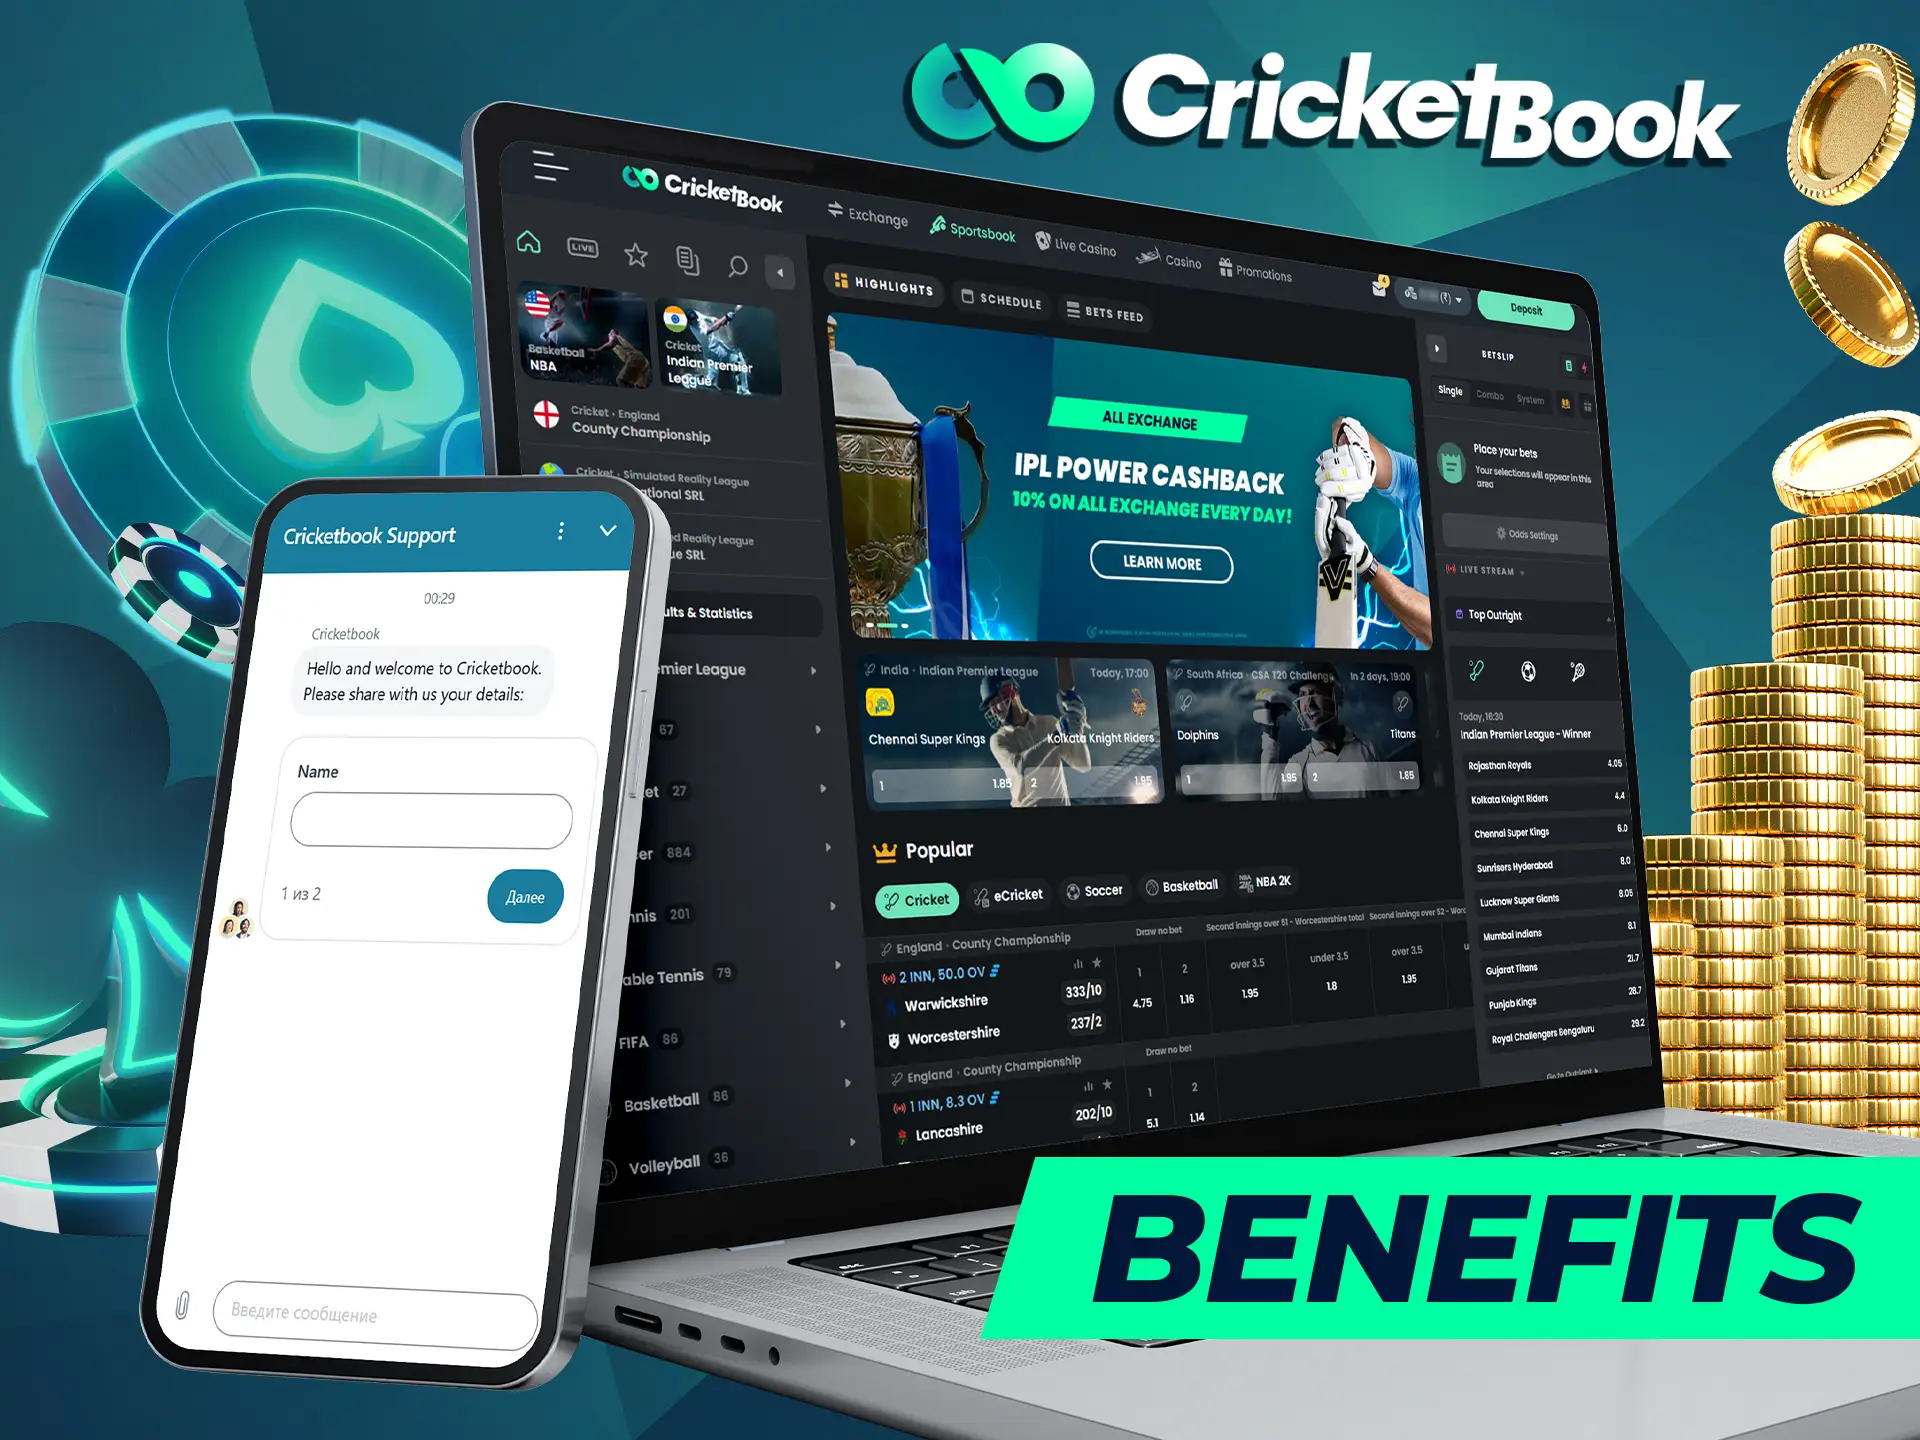 CricketBook has a wide range of benefits, which you can read about in our article.